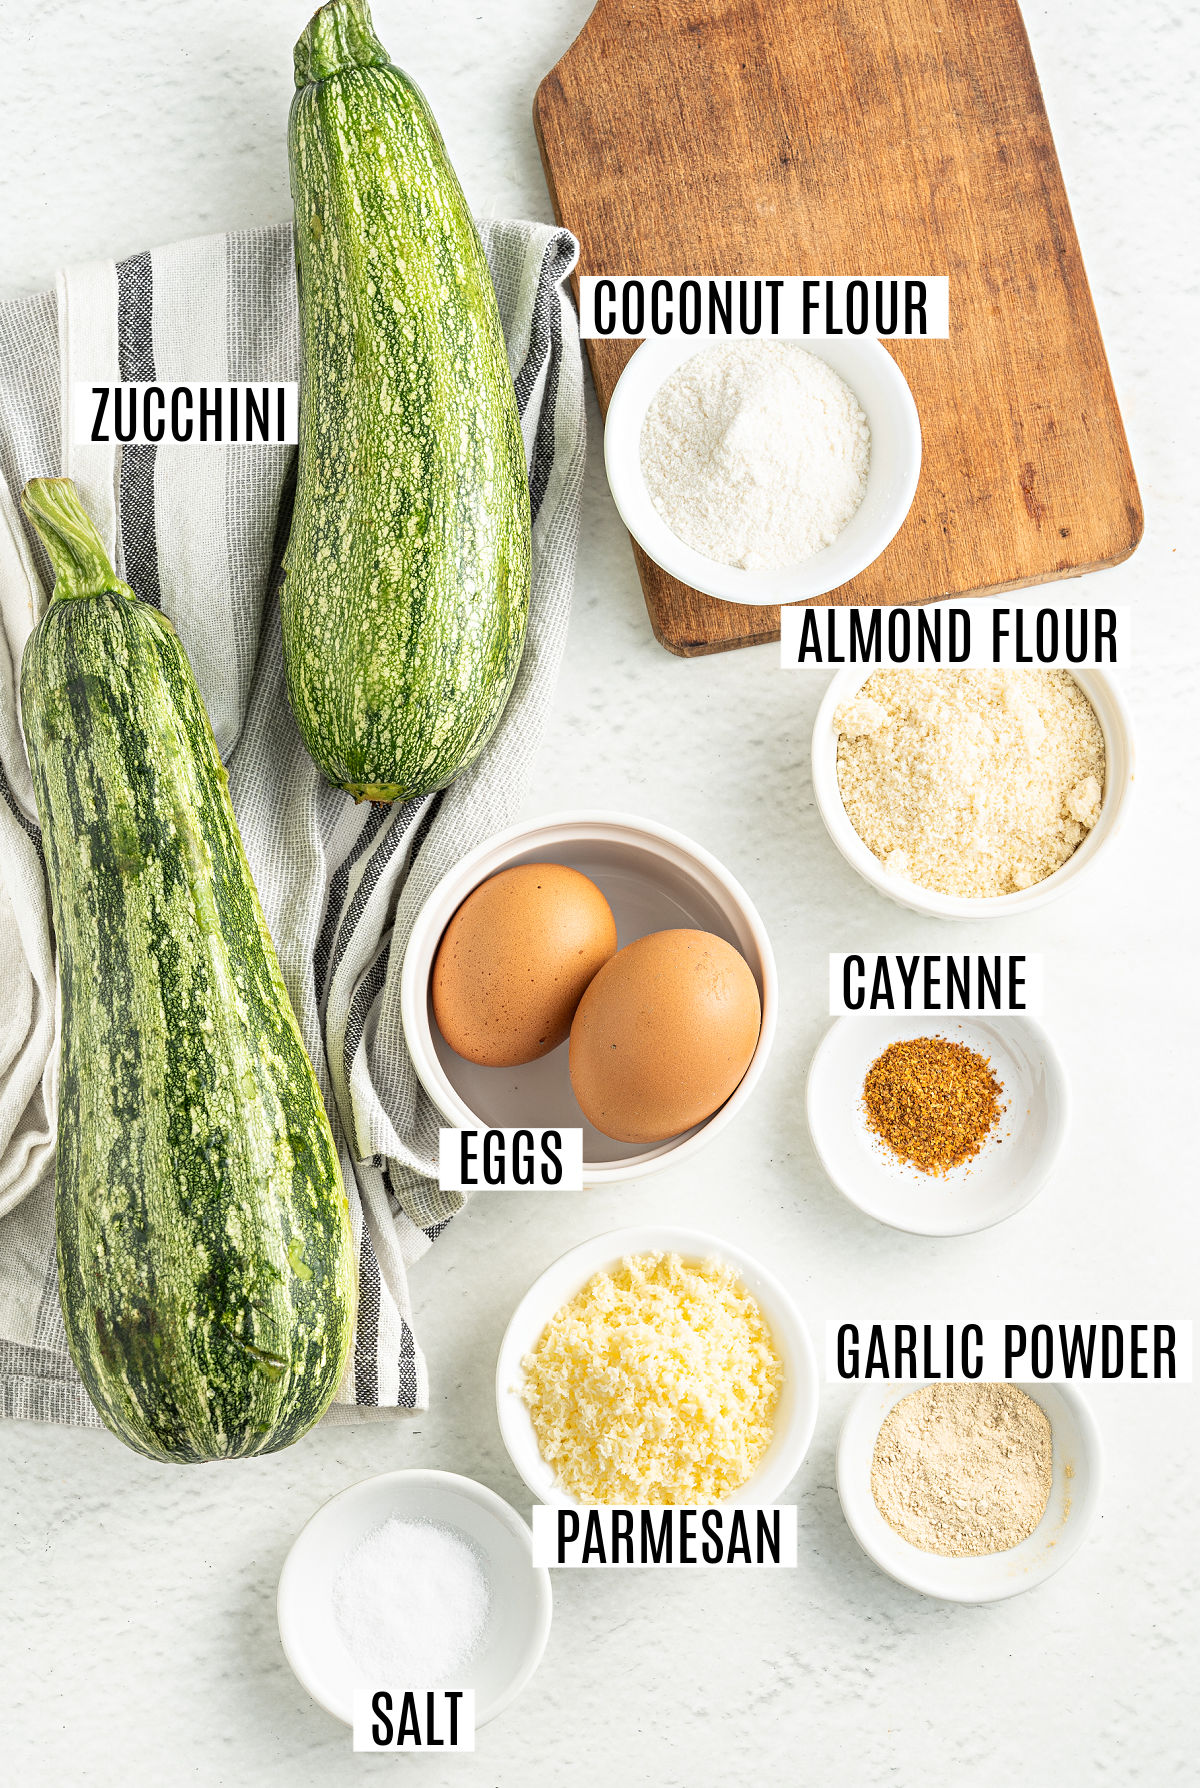 Ingredients needed to make zucchini fries.